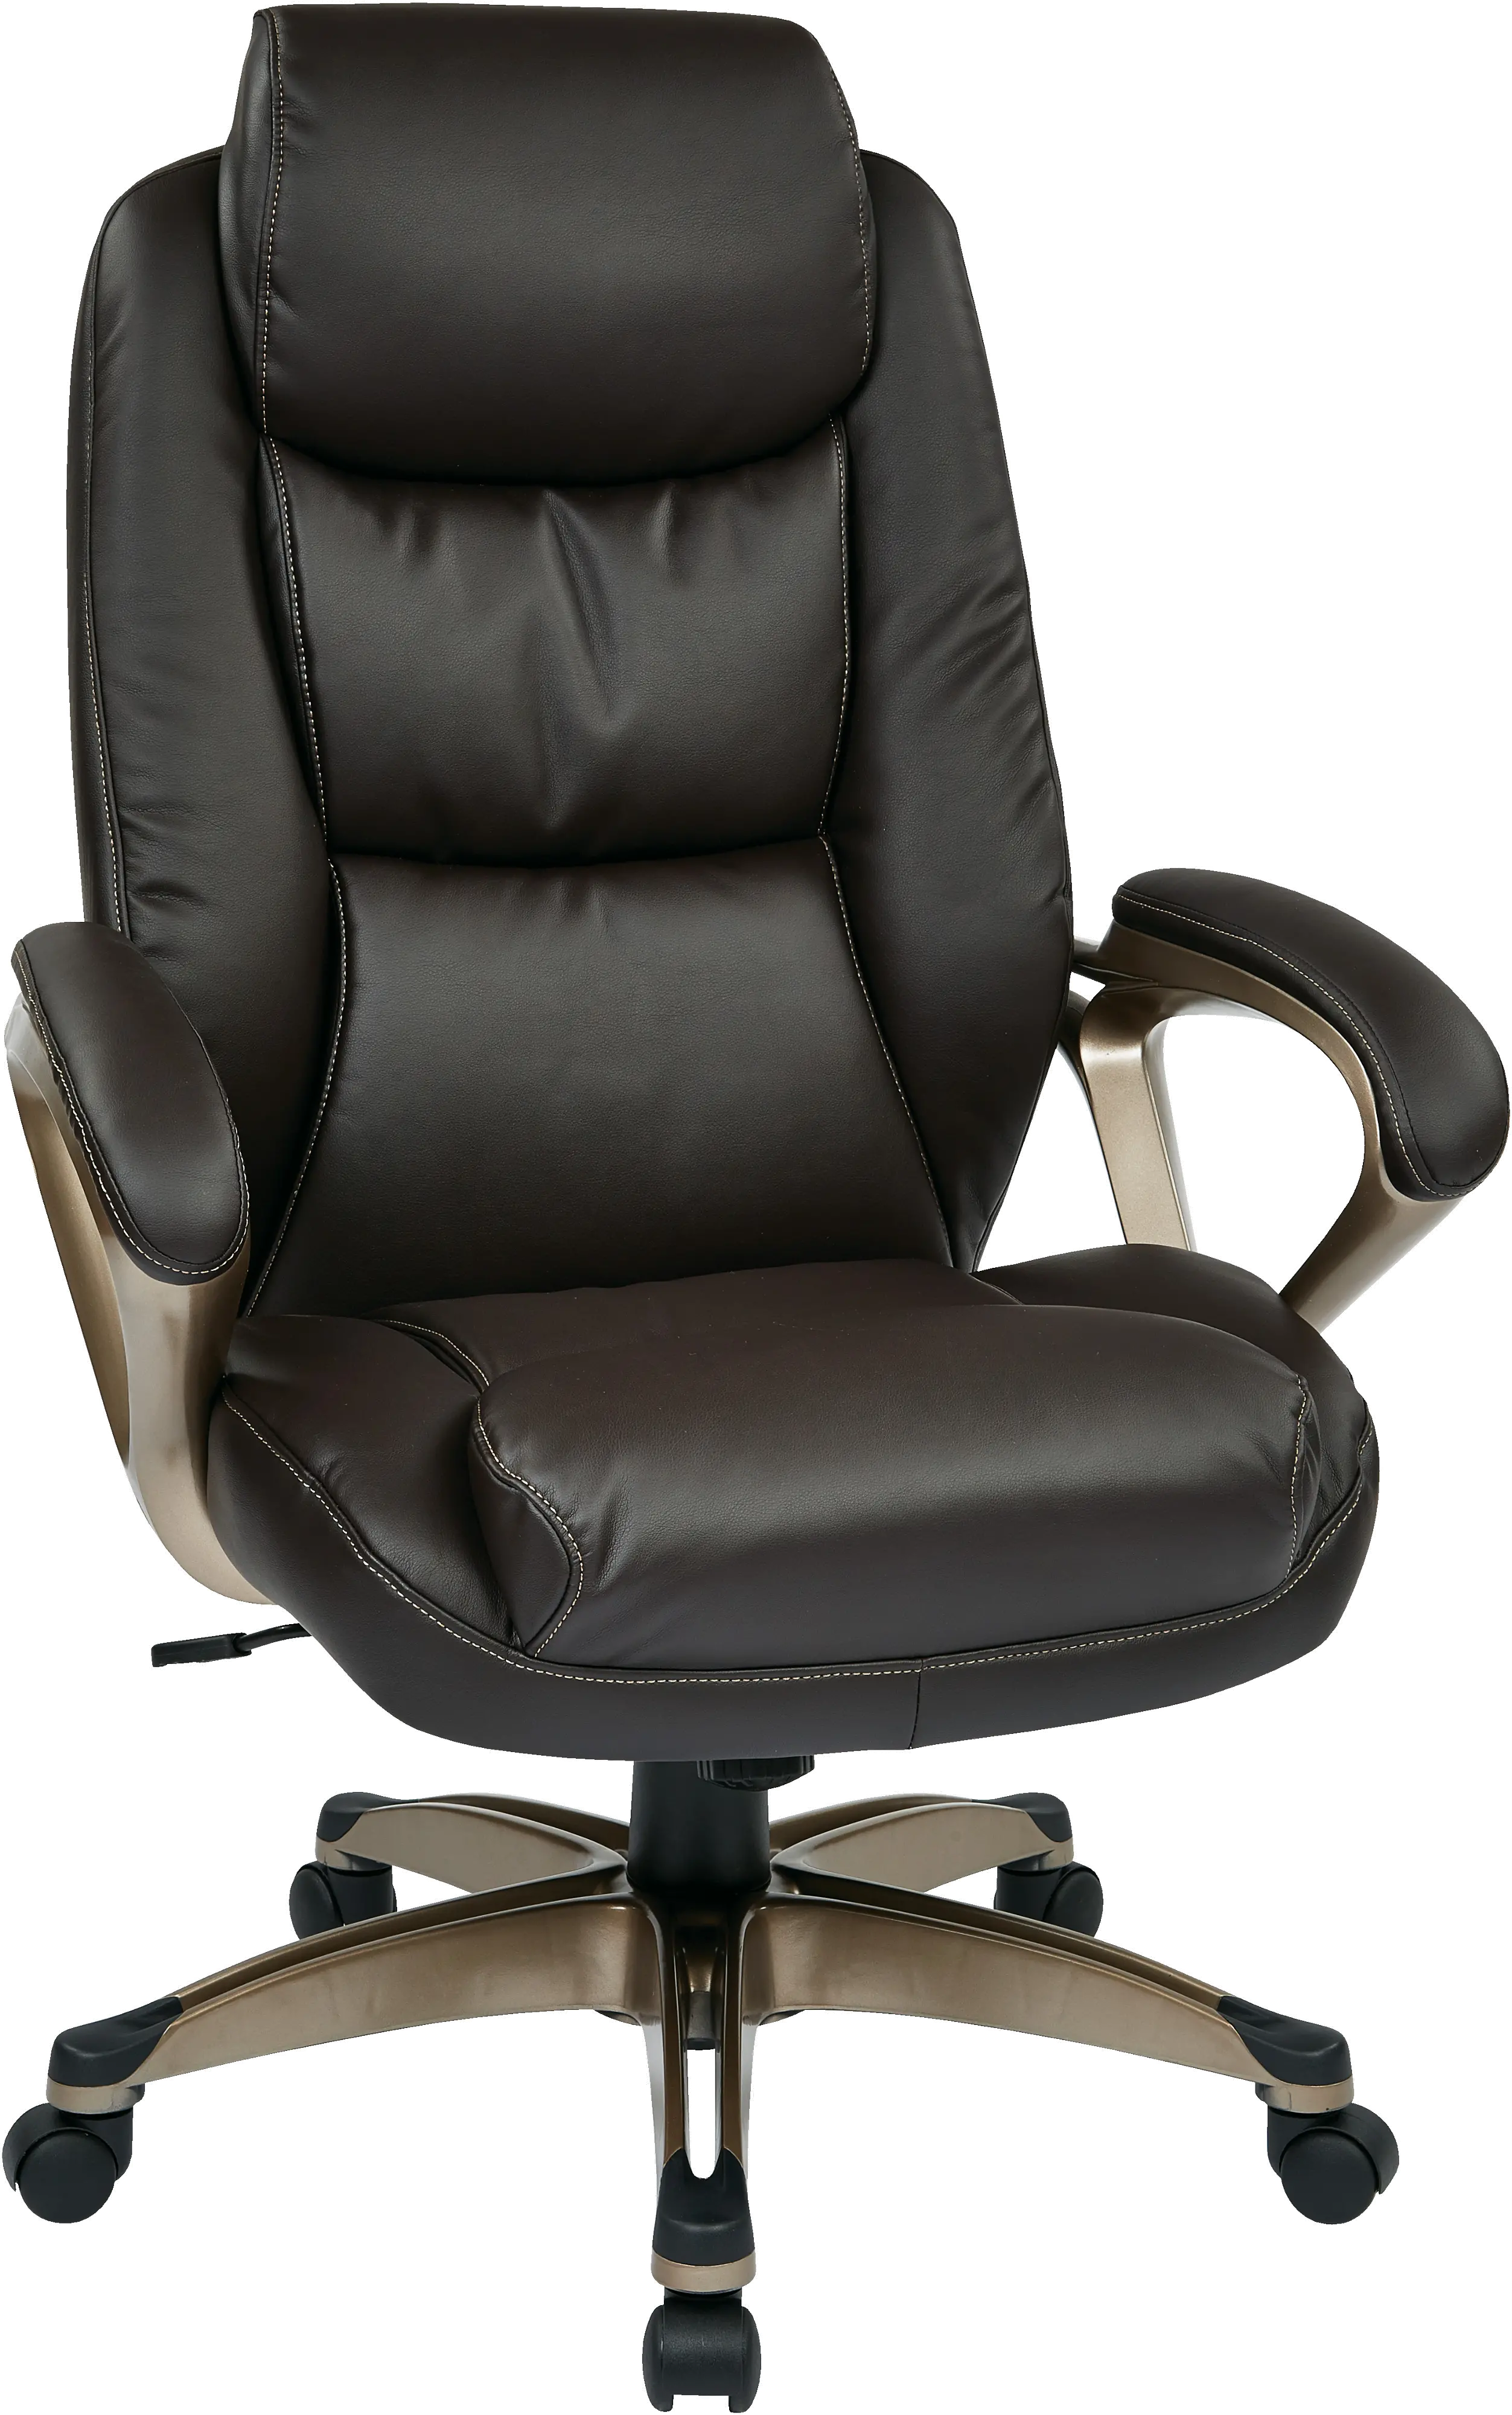 https://static.rcwilley.com/products/112190839/Espresso-Home-Office-Chair-with-Bronze-Accents-rcwilley-image1.webp